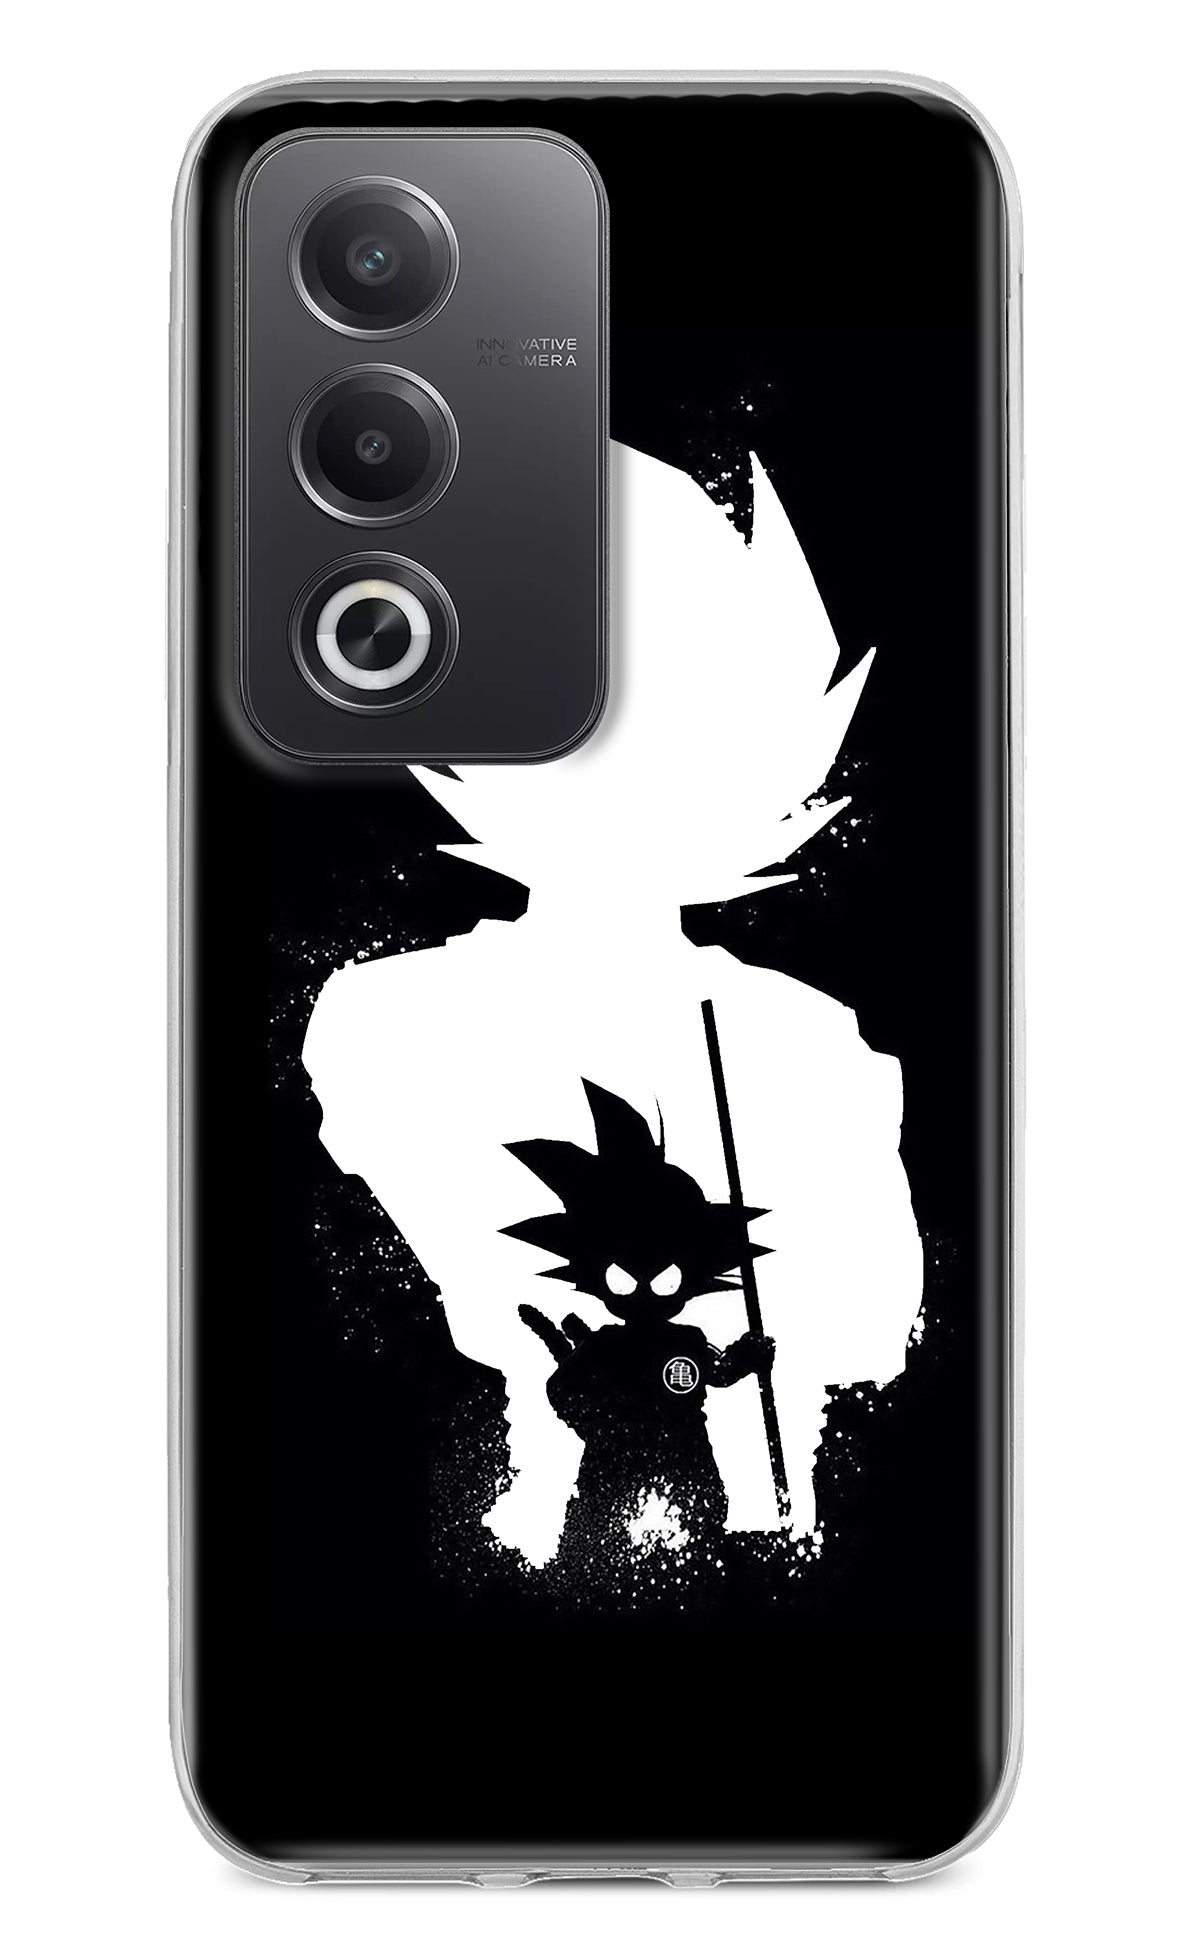 Goku Shadow Oppo A3 Pro 5G Back Cover